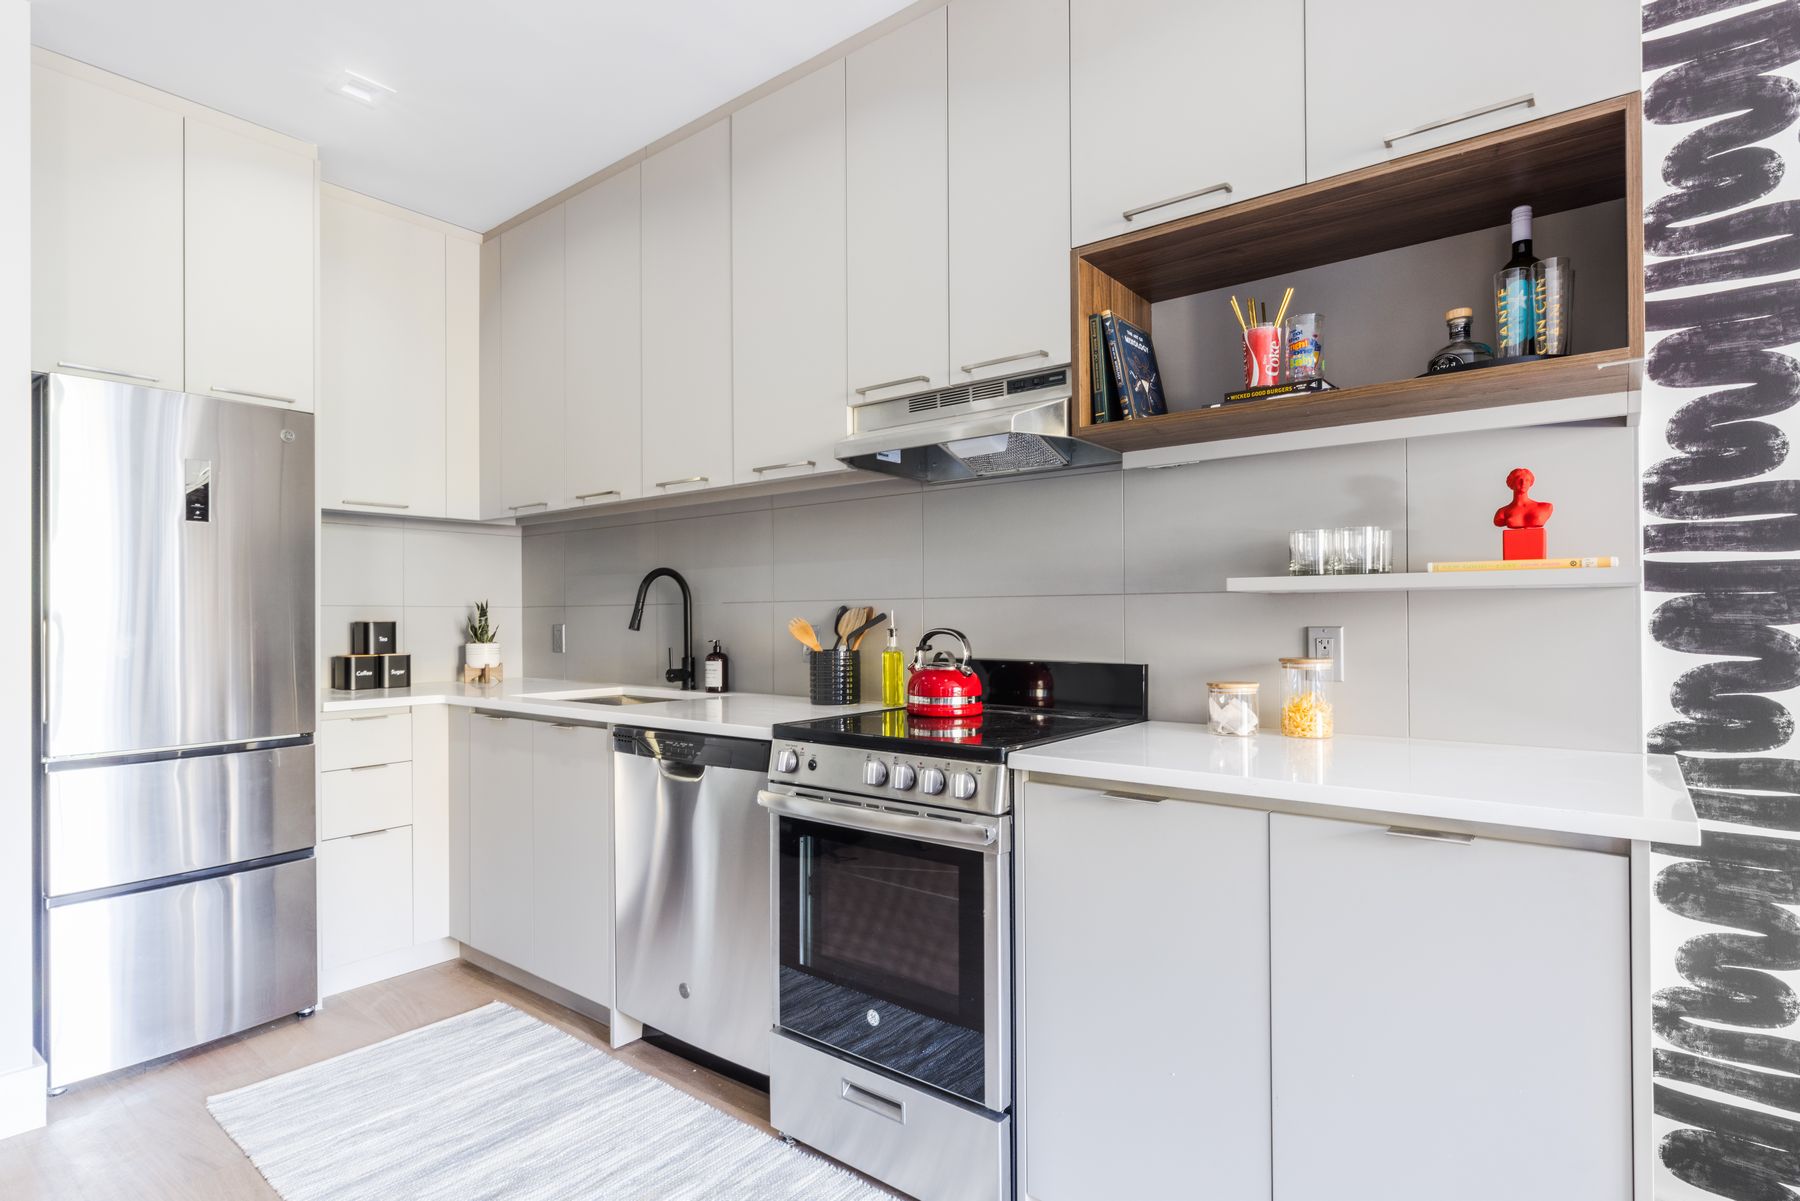 Bright modern galley kitchen with stainless steel fridge, oven/stove and dishwaser, white cabinetry with silver handles and builtin wood shelp, wood flooring